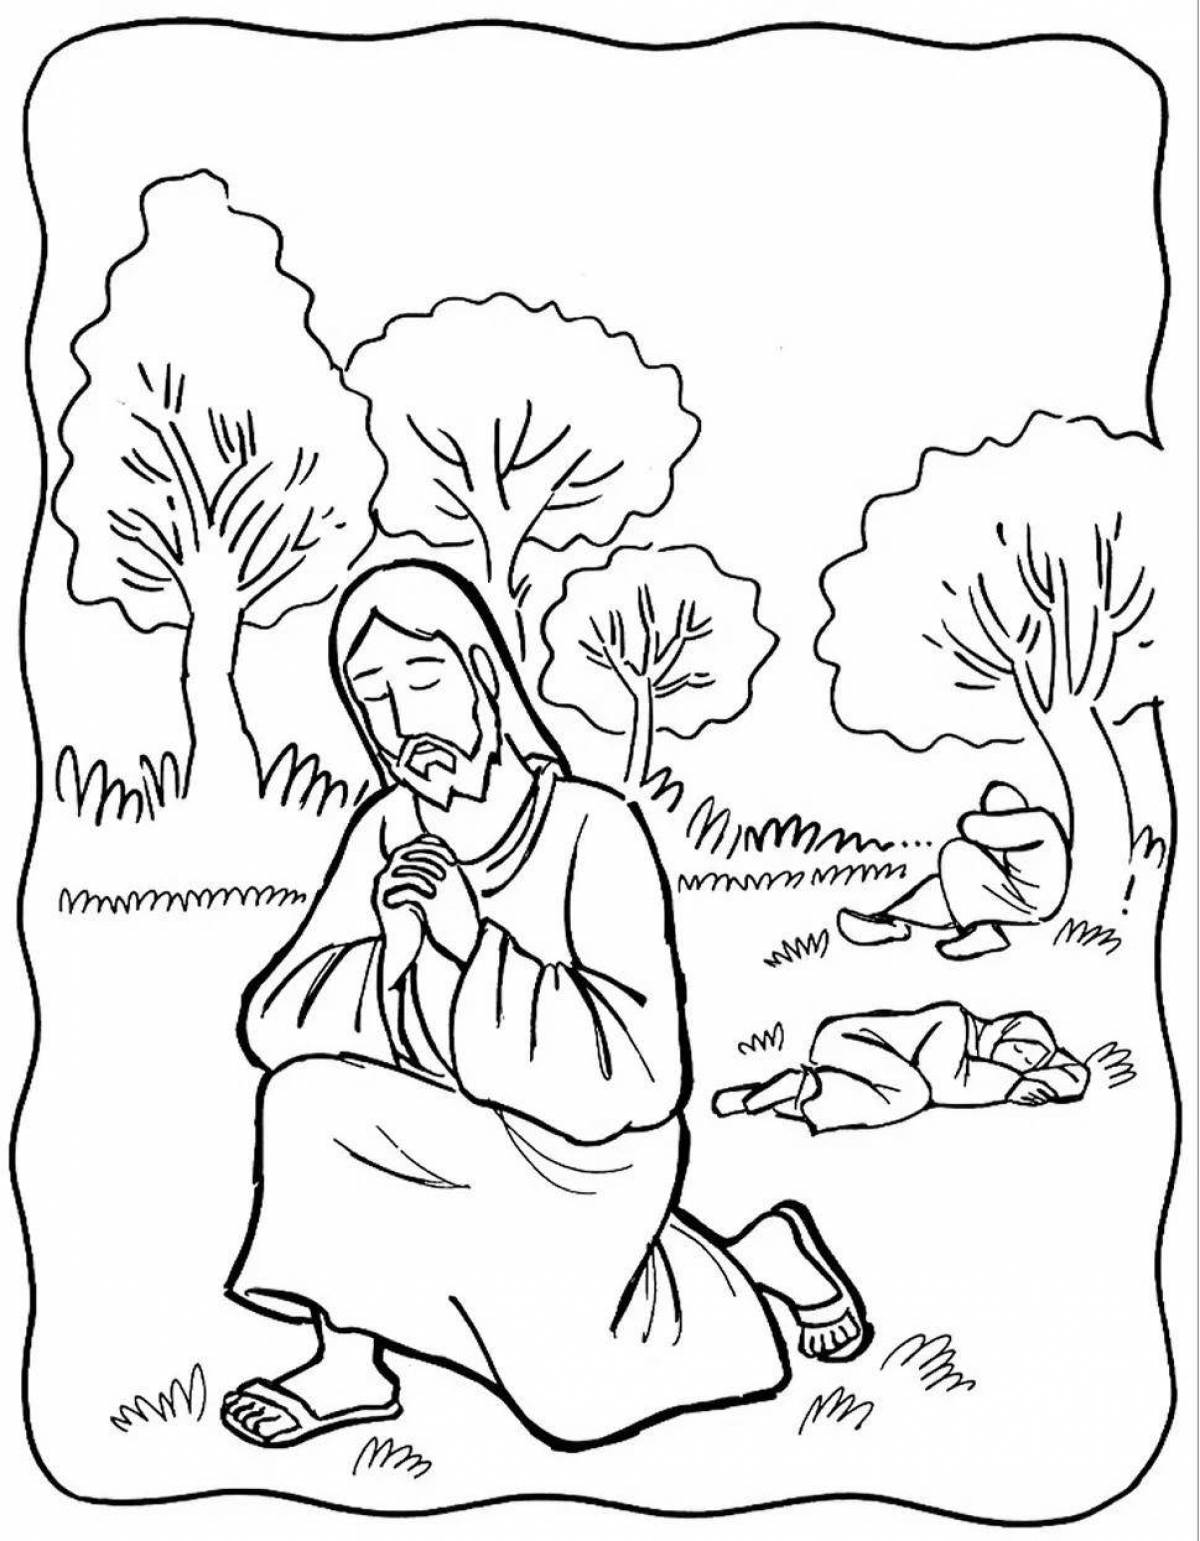 Glittering Jesus coloring page